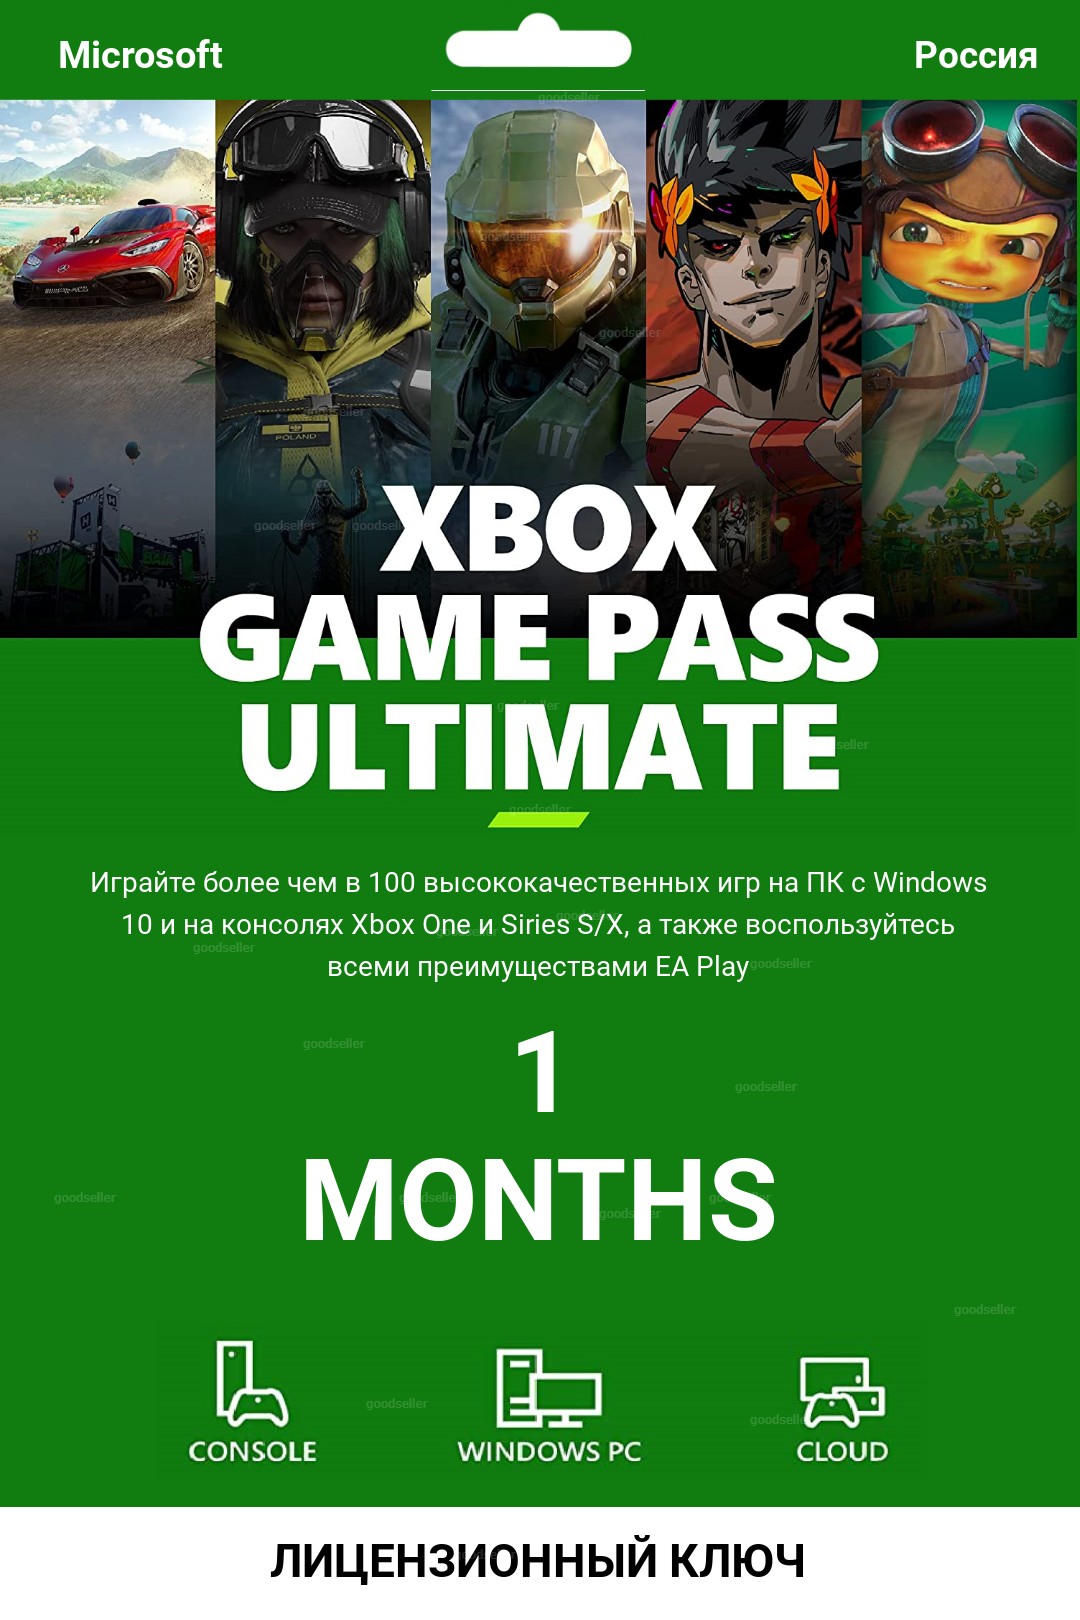 XBOX GAME PASS ULTIMATE 1 MONTH (RUSSIA/EXTENSION) 🎁